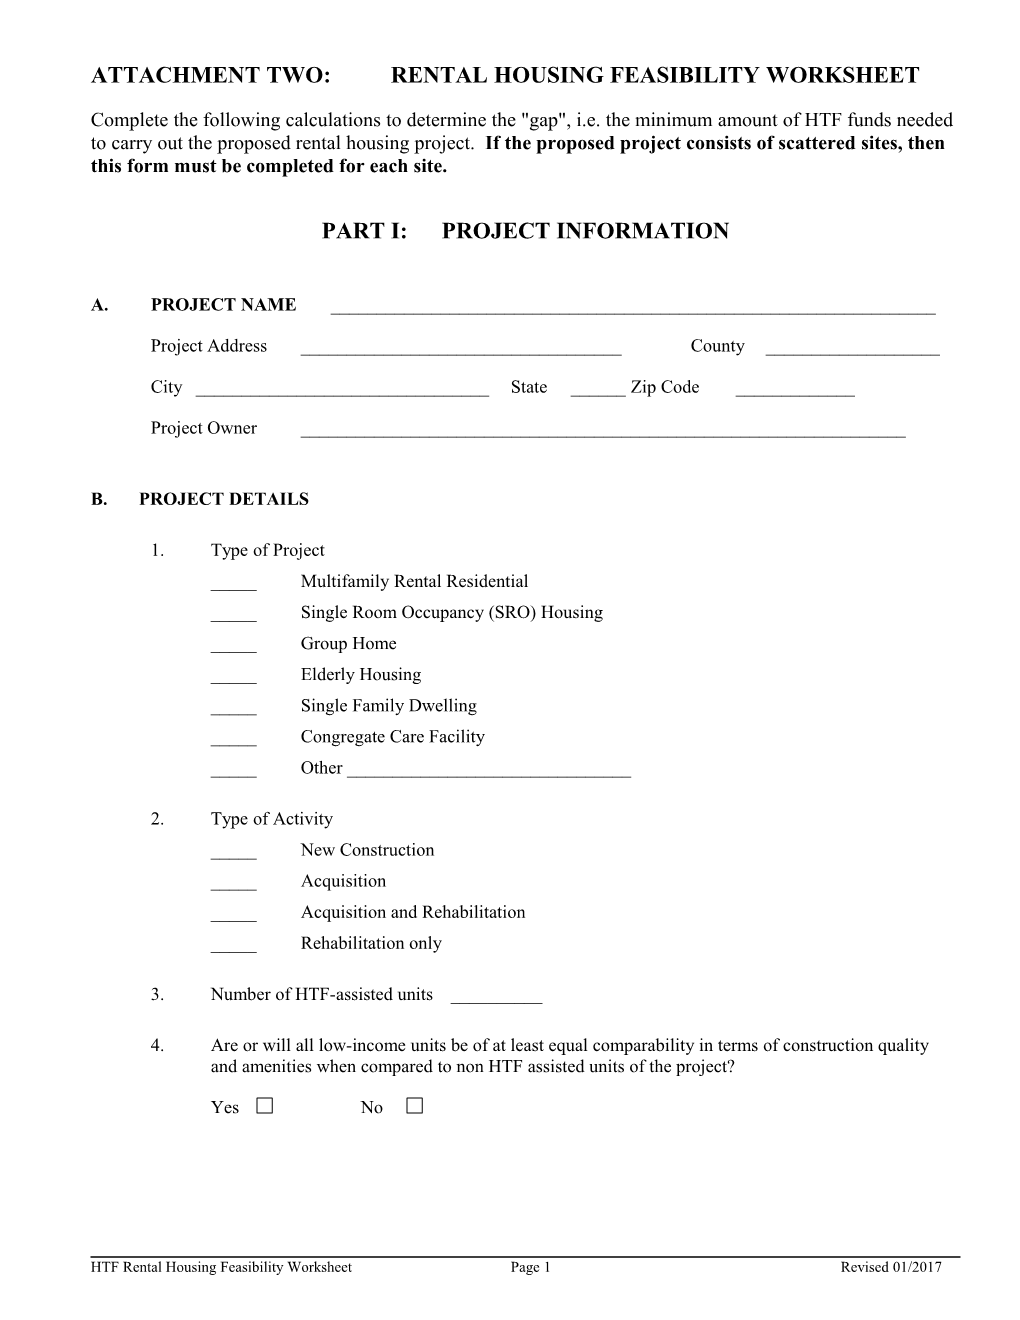 Attachment Two: Rental Housing Feasibility Worksheet